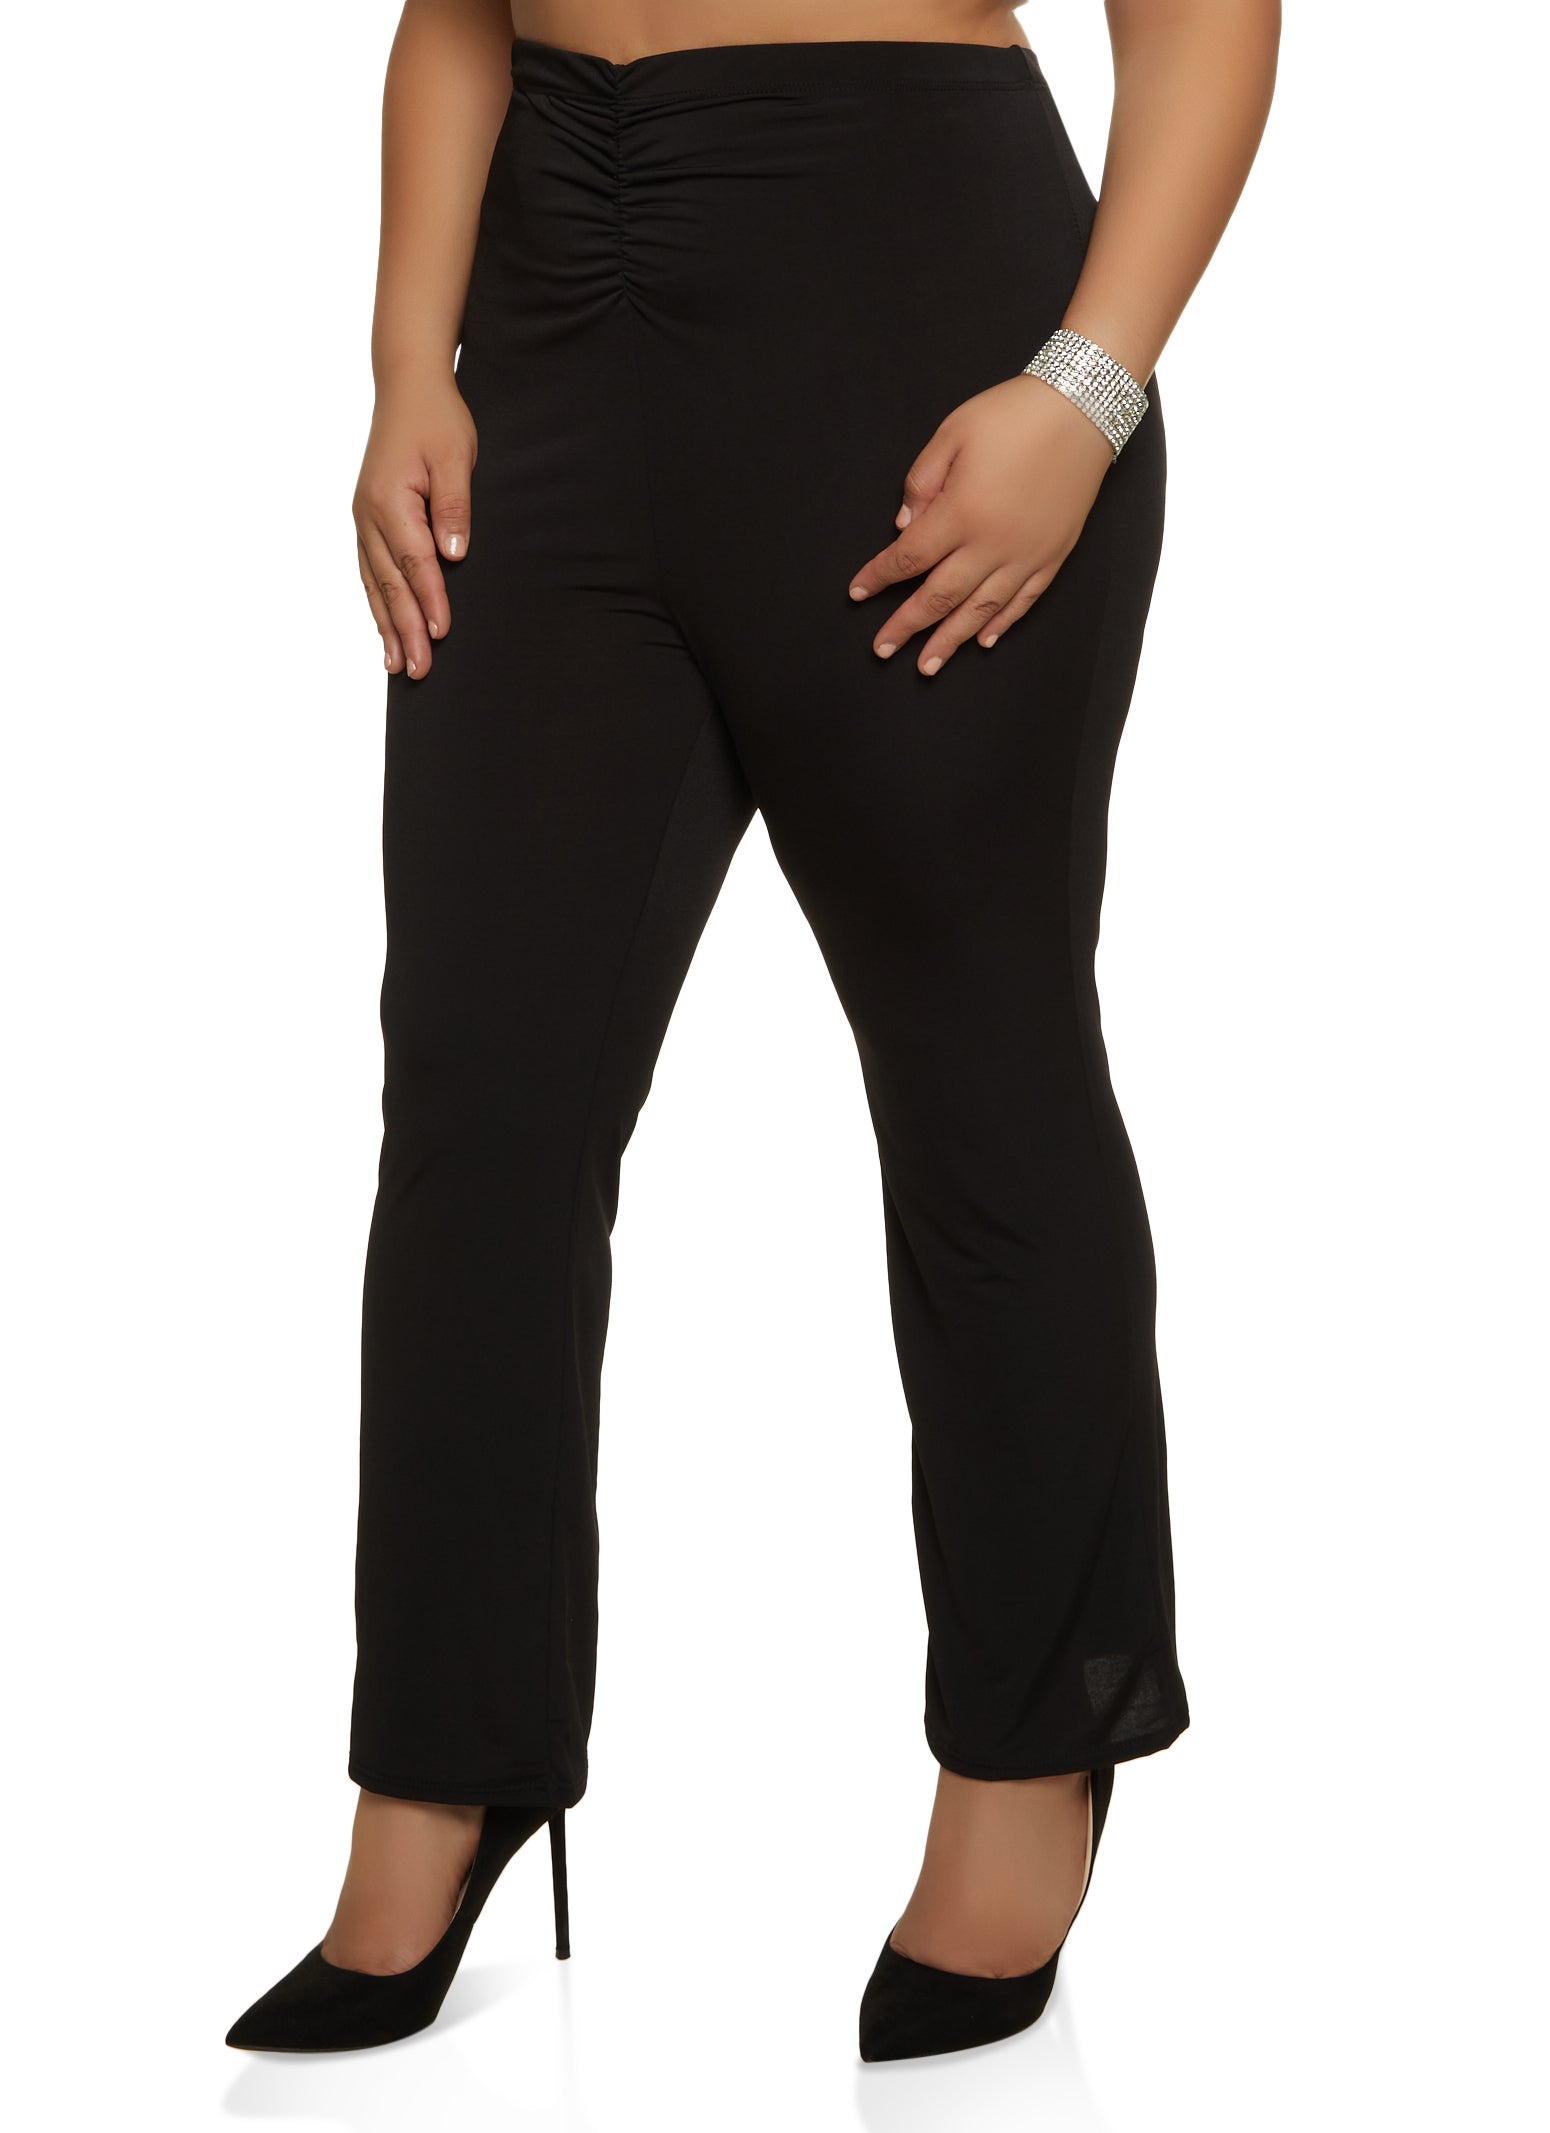 Women's Plus Relaxed Fit Straight Leg Cargo Pants | Dickies